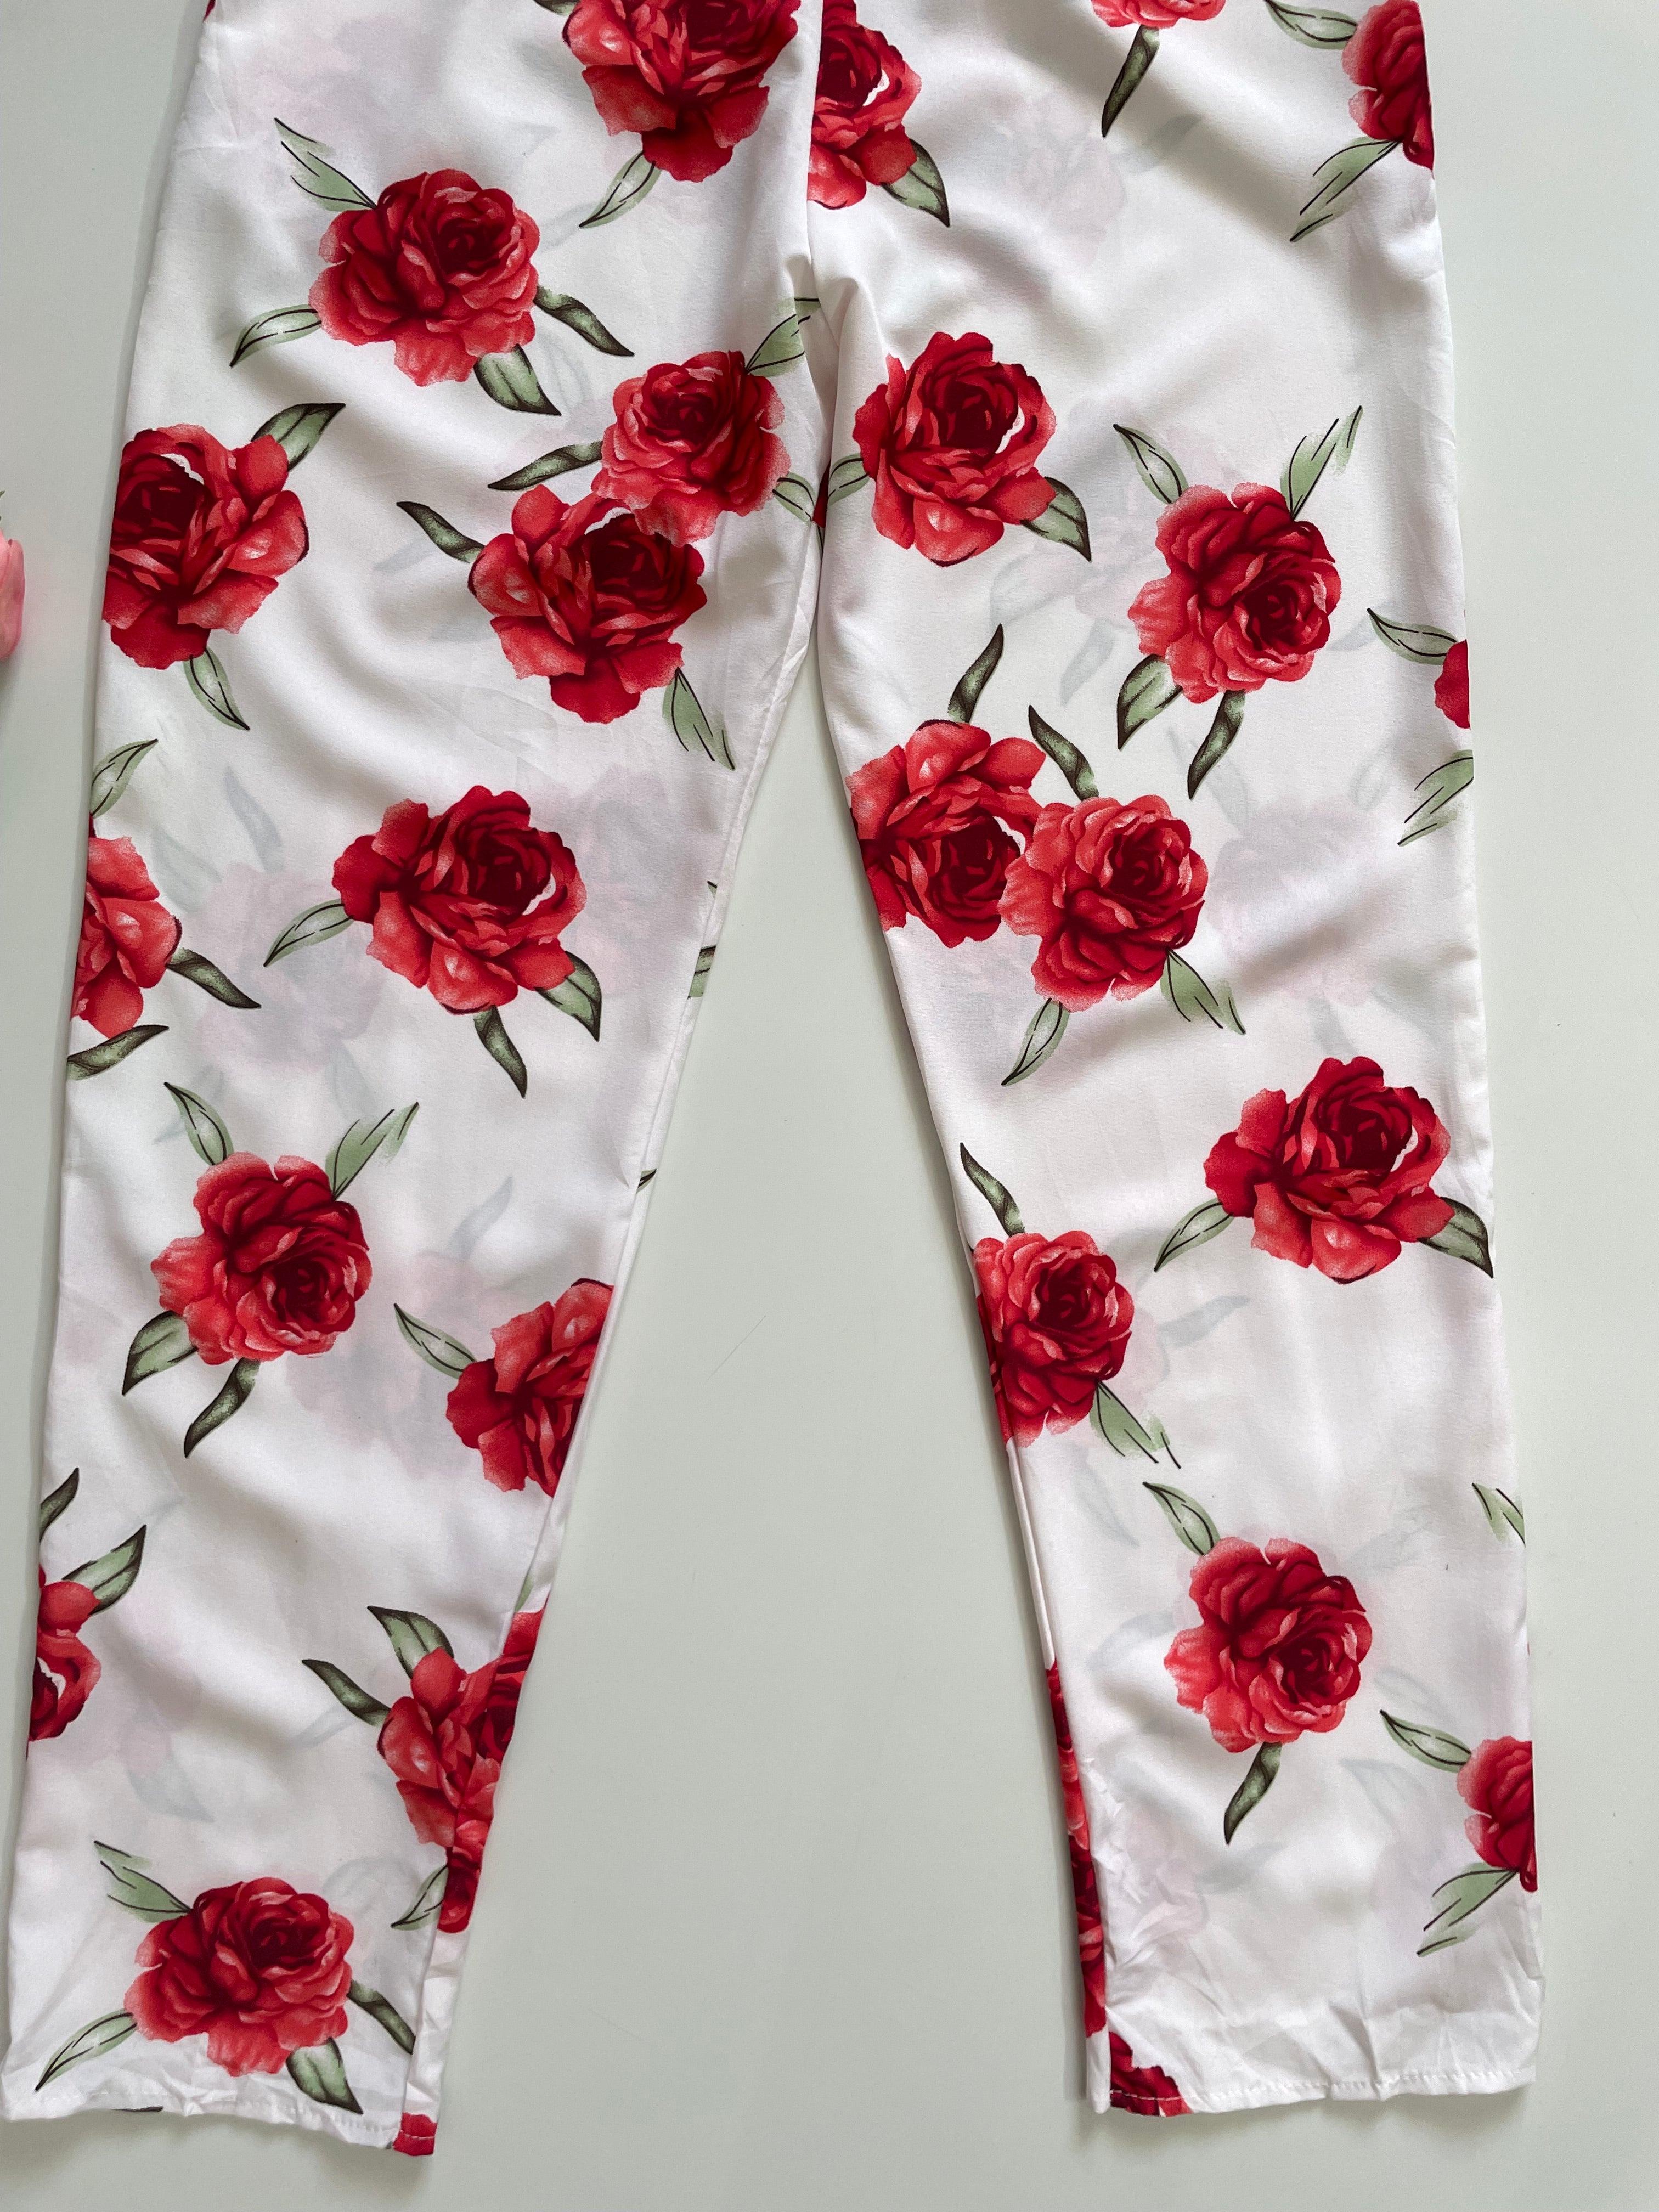 RED ROSES PANTS - WAIST 28 TO 30